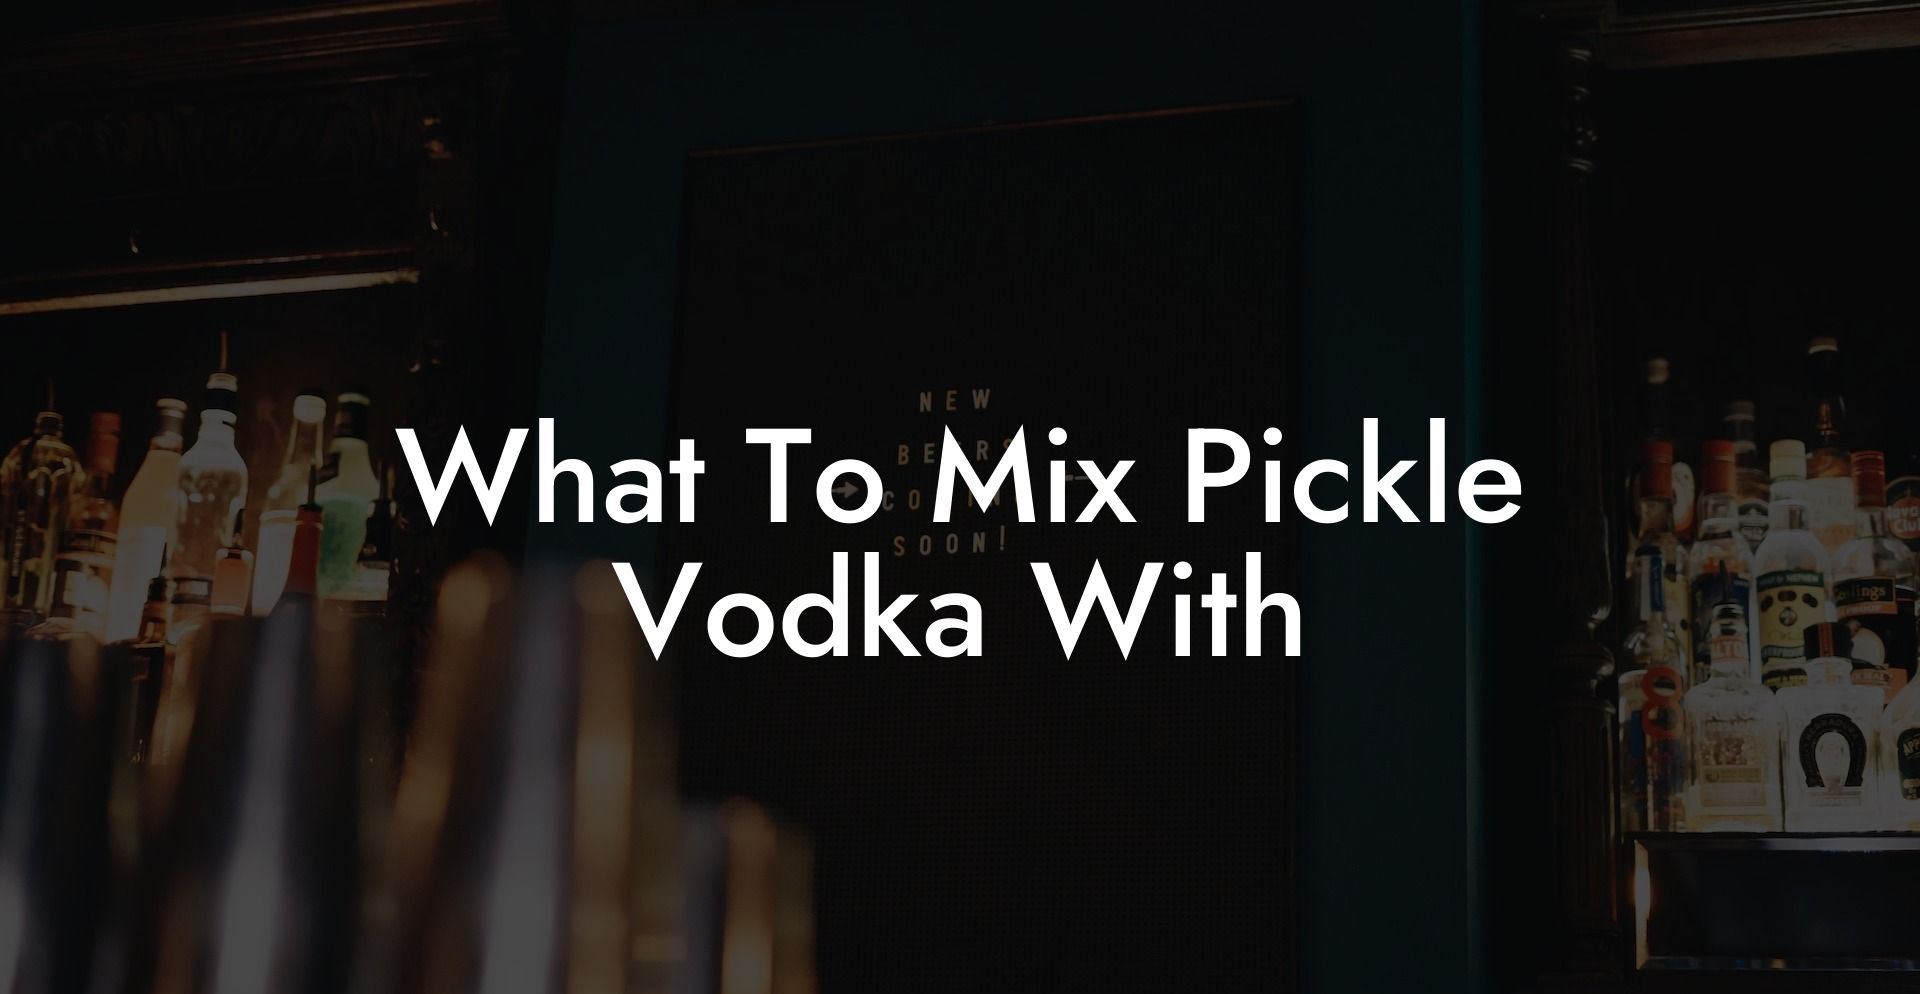 What To Mix Pickle Vodka With